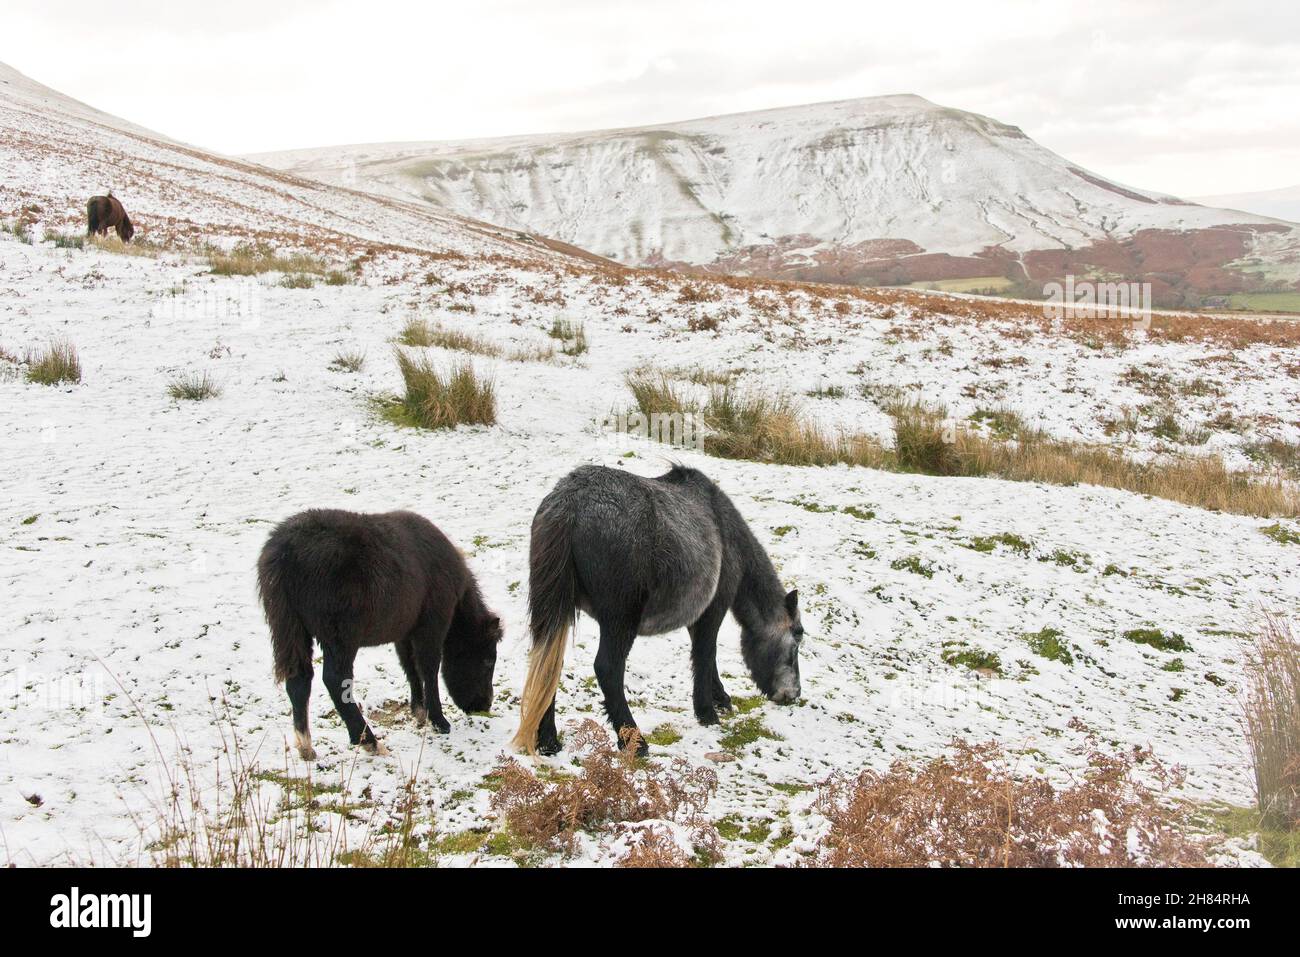 Brecon Beacons, Powys, Wales, UK. 27th Nov, 2021. Welsh mountain ponies forage for grass beneath the snow in a wintry landscape after snow fell overnight on high land in the Brecon Beacons National Park in Powys, Wales, UK Credit: Graham M. Lawrence/Alamy Live News Stock Photo